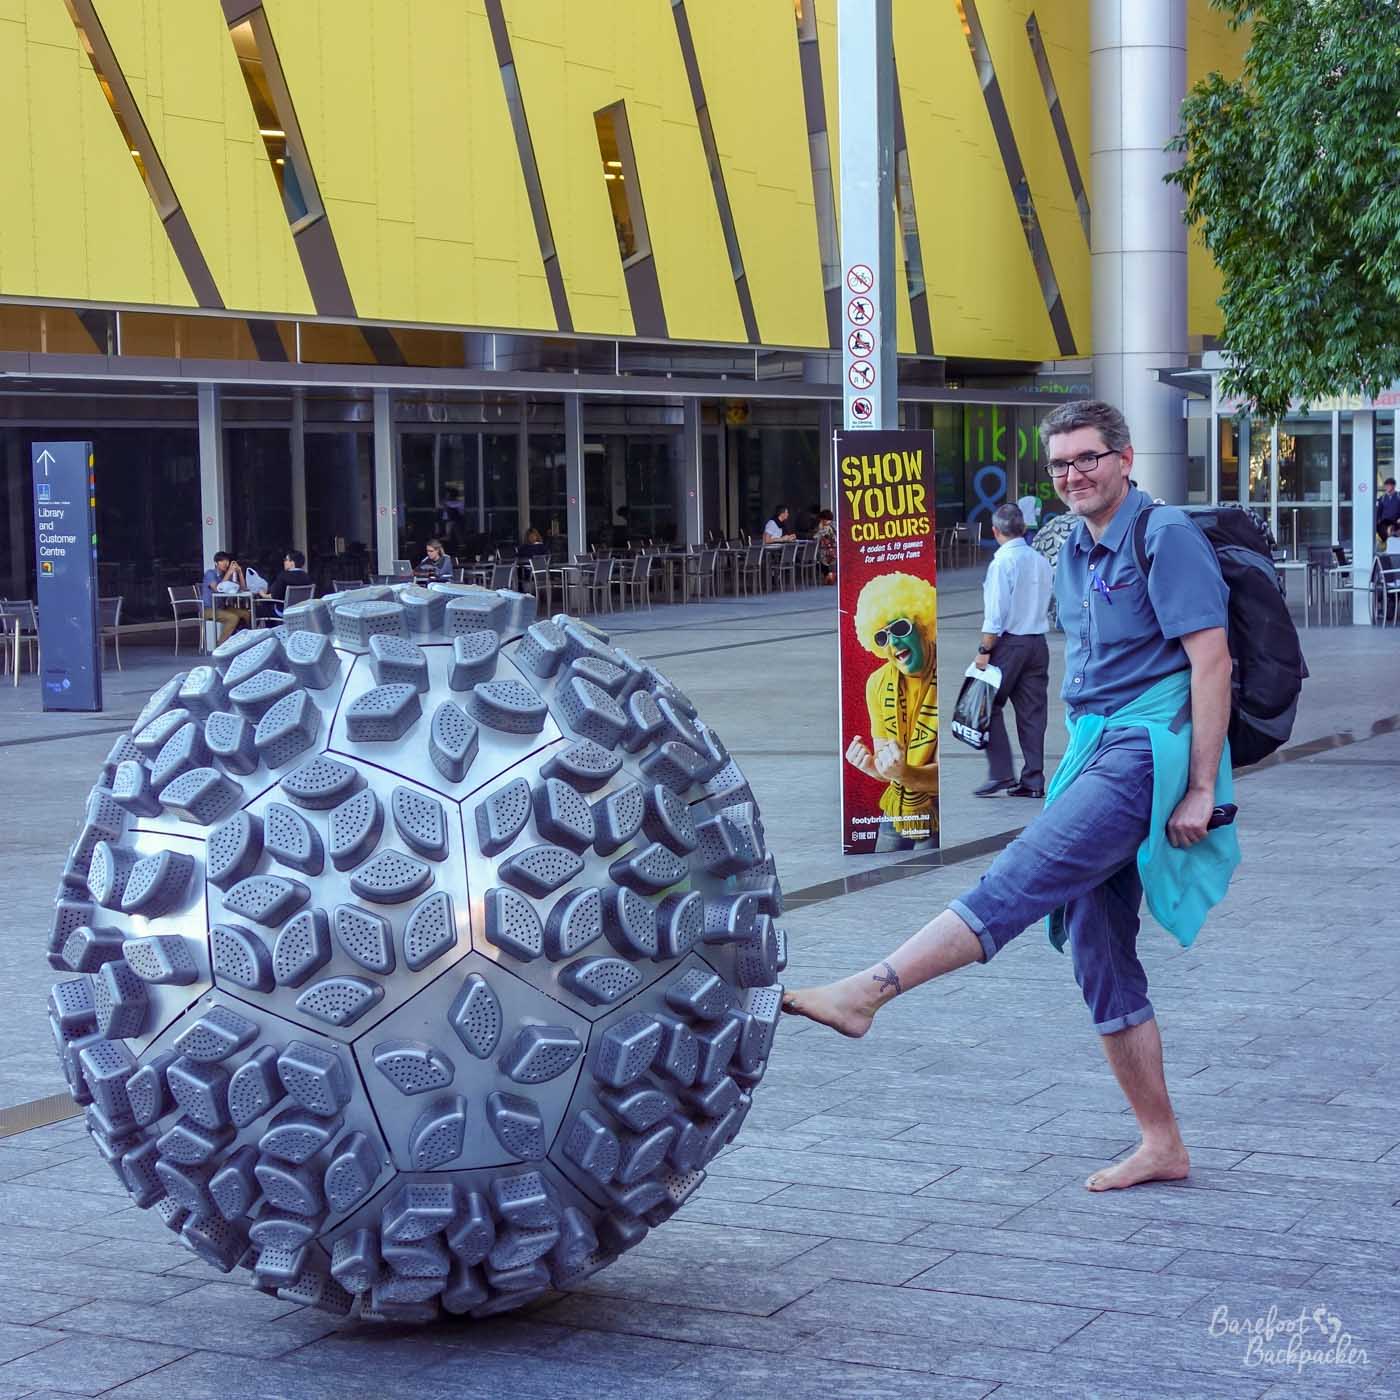 A city square, paved area, in front of a building with a row of tables and chairs outside. In the foreground is a large metallic ball, a piece of artwork probably about 1m80 tall, and, as it's a sphere, the same in width. It has segments on it like pentagons and hexagons, and each has a number of sticky-out bits in the shape of wedges. The whole thing has the feel of a very grippy piece of rubber. Anyway. Standing next to the ball, well, pretending to kick it, is a chap with a backpack. The toes of his left foot (he is barefoot) are just touching the ball.